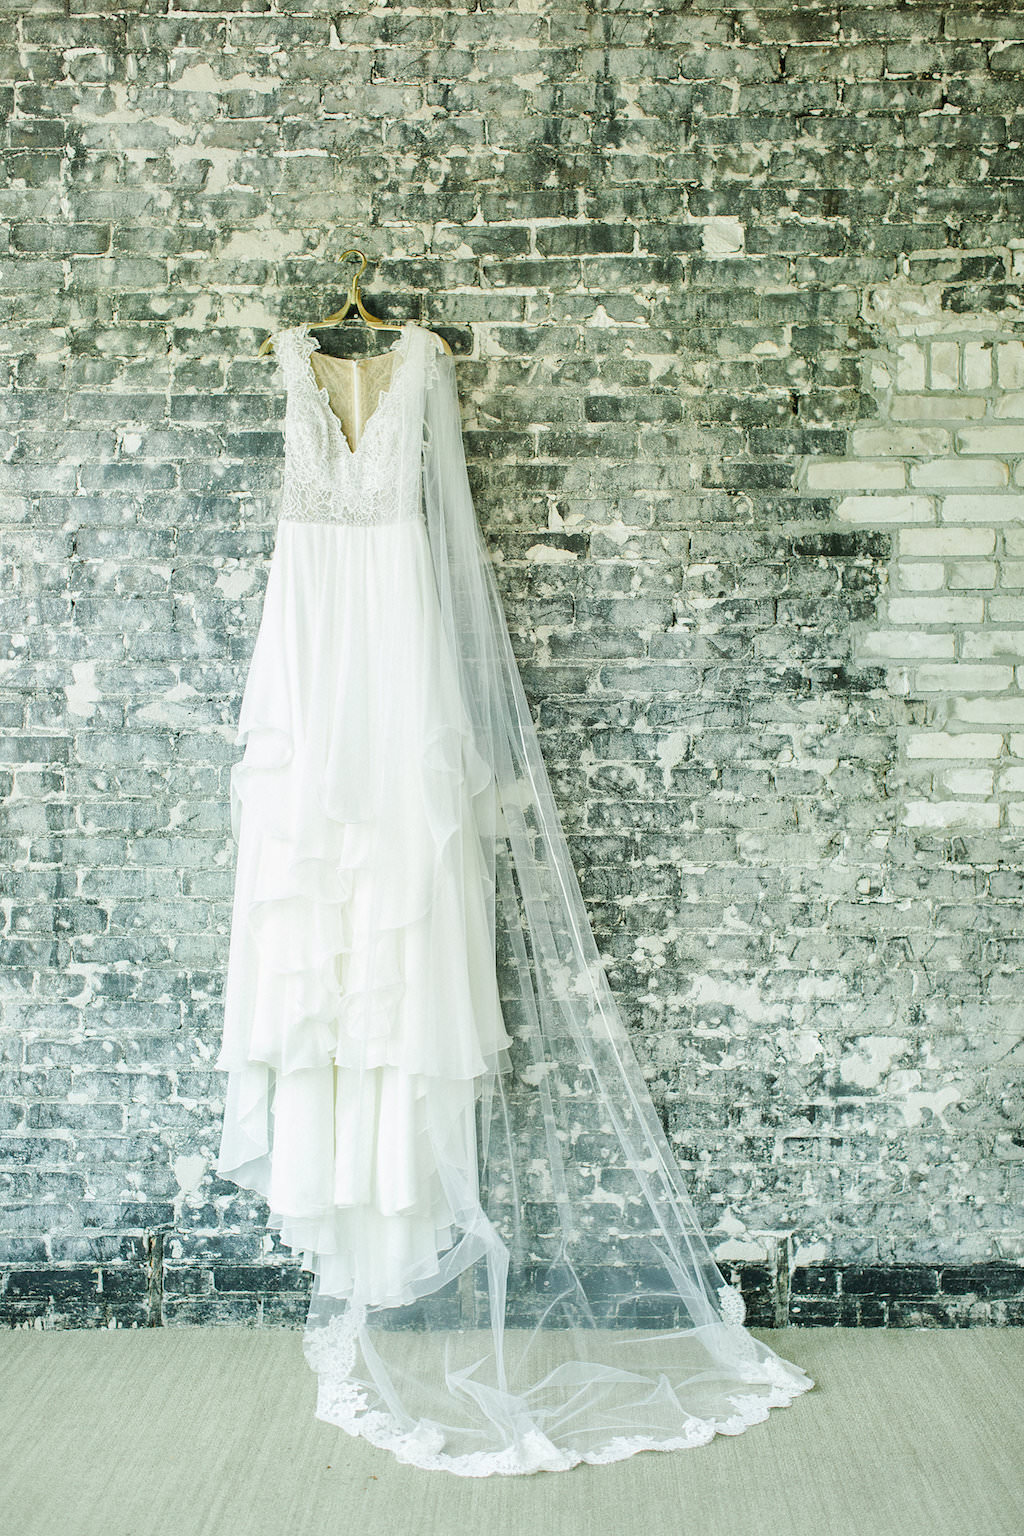 Lace Bodice Hayley Paige Wedding Dress with Veil on Hanger and Brick Wall